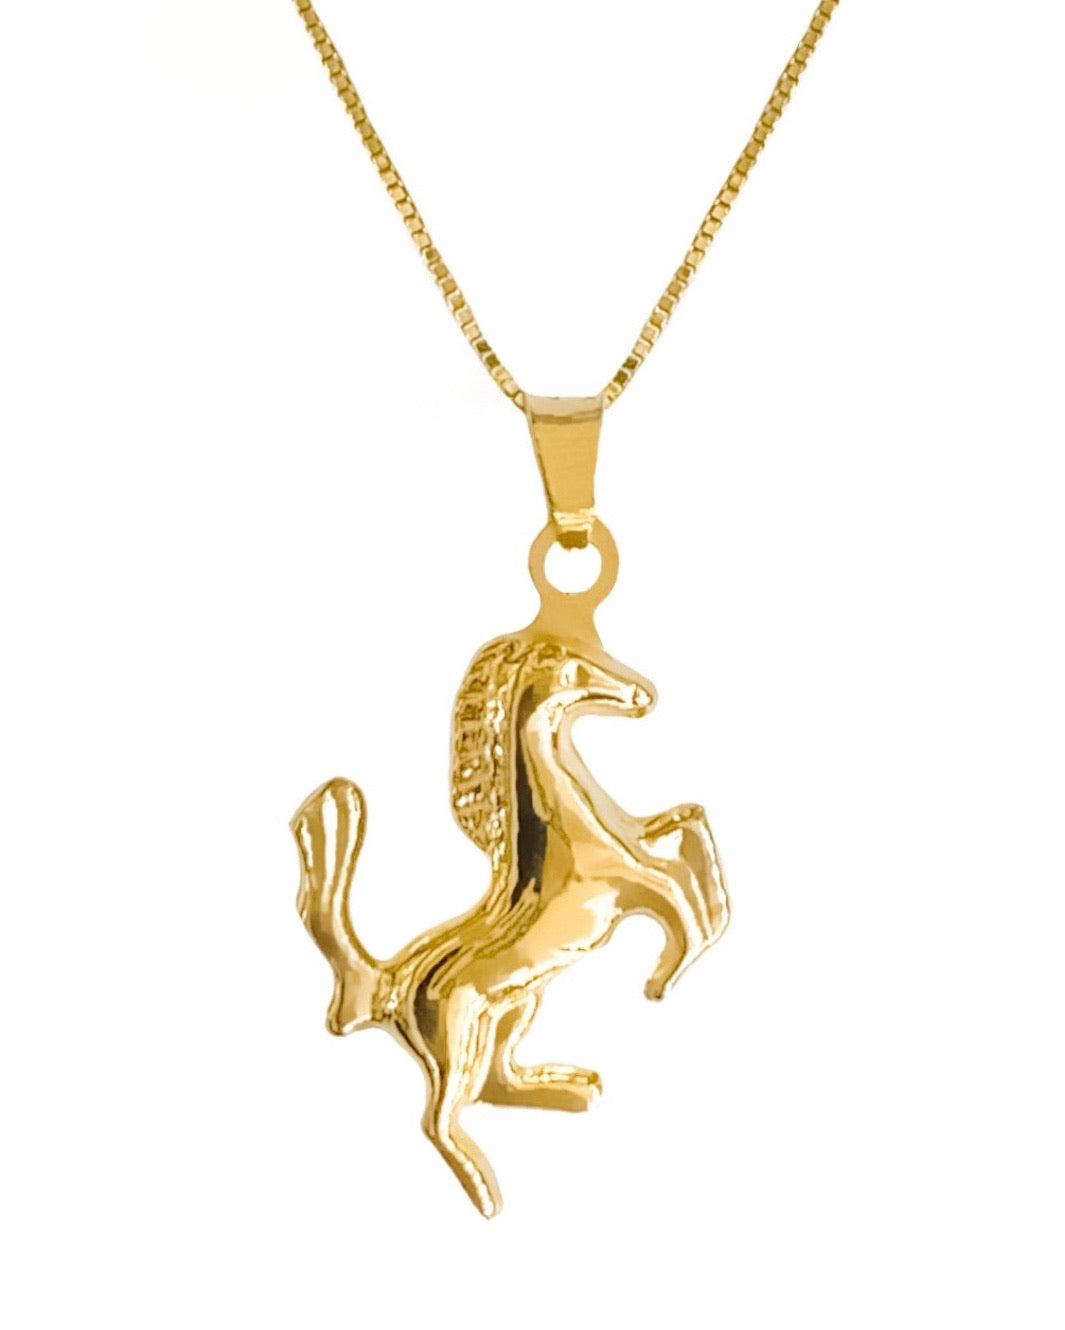 14K YELLOW GOLD HORSE NECKLACE